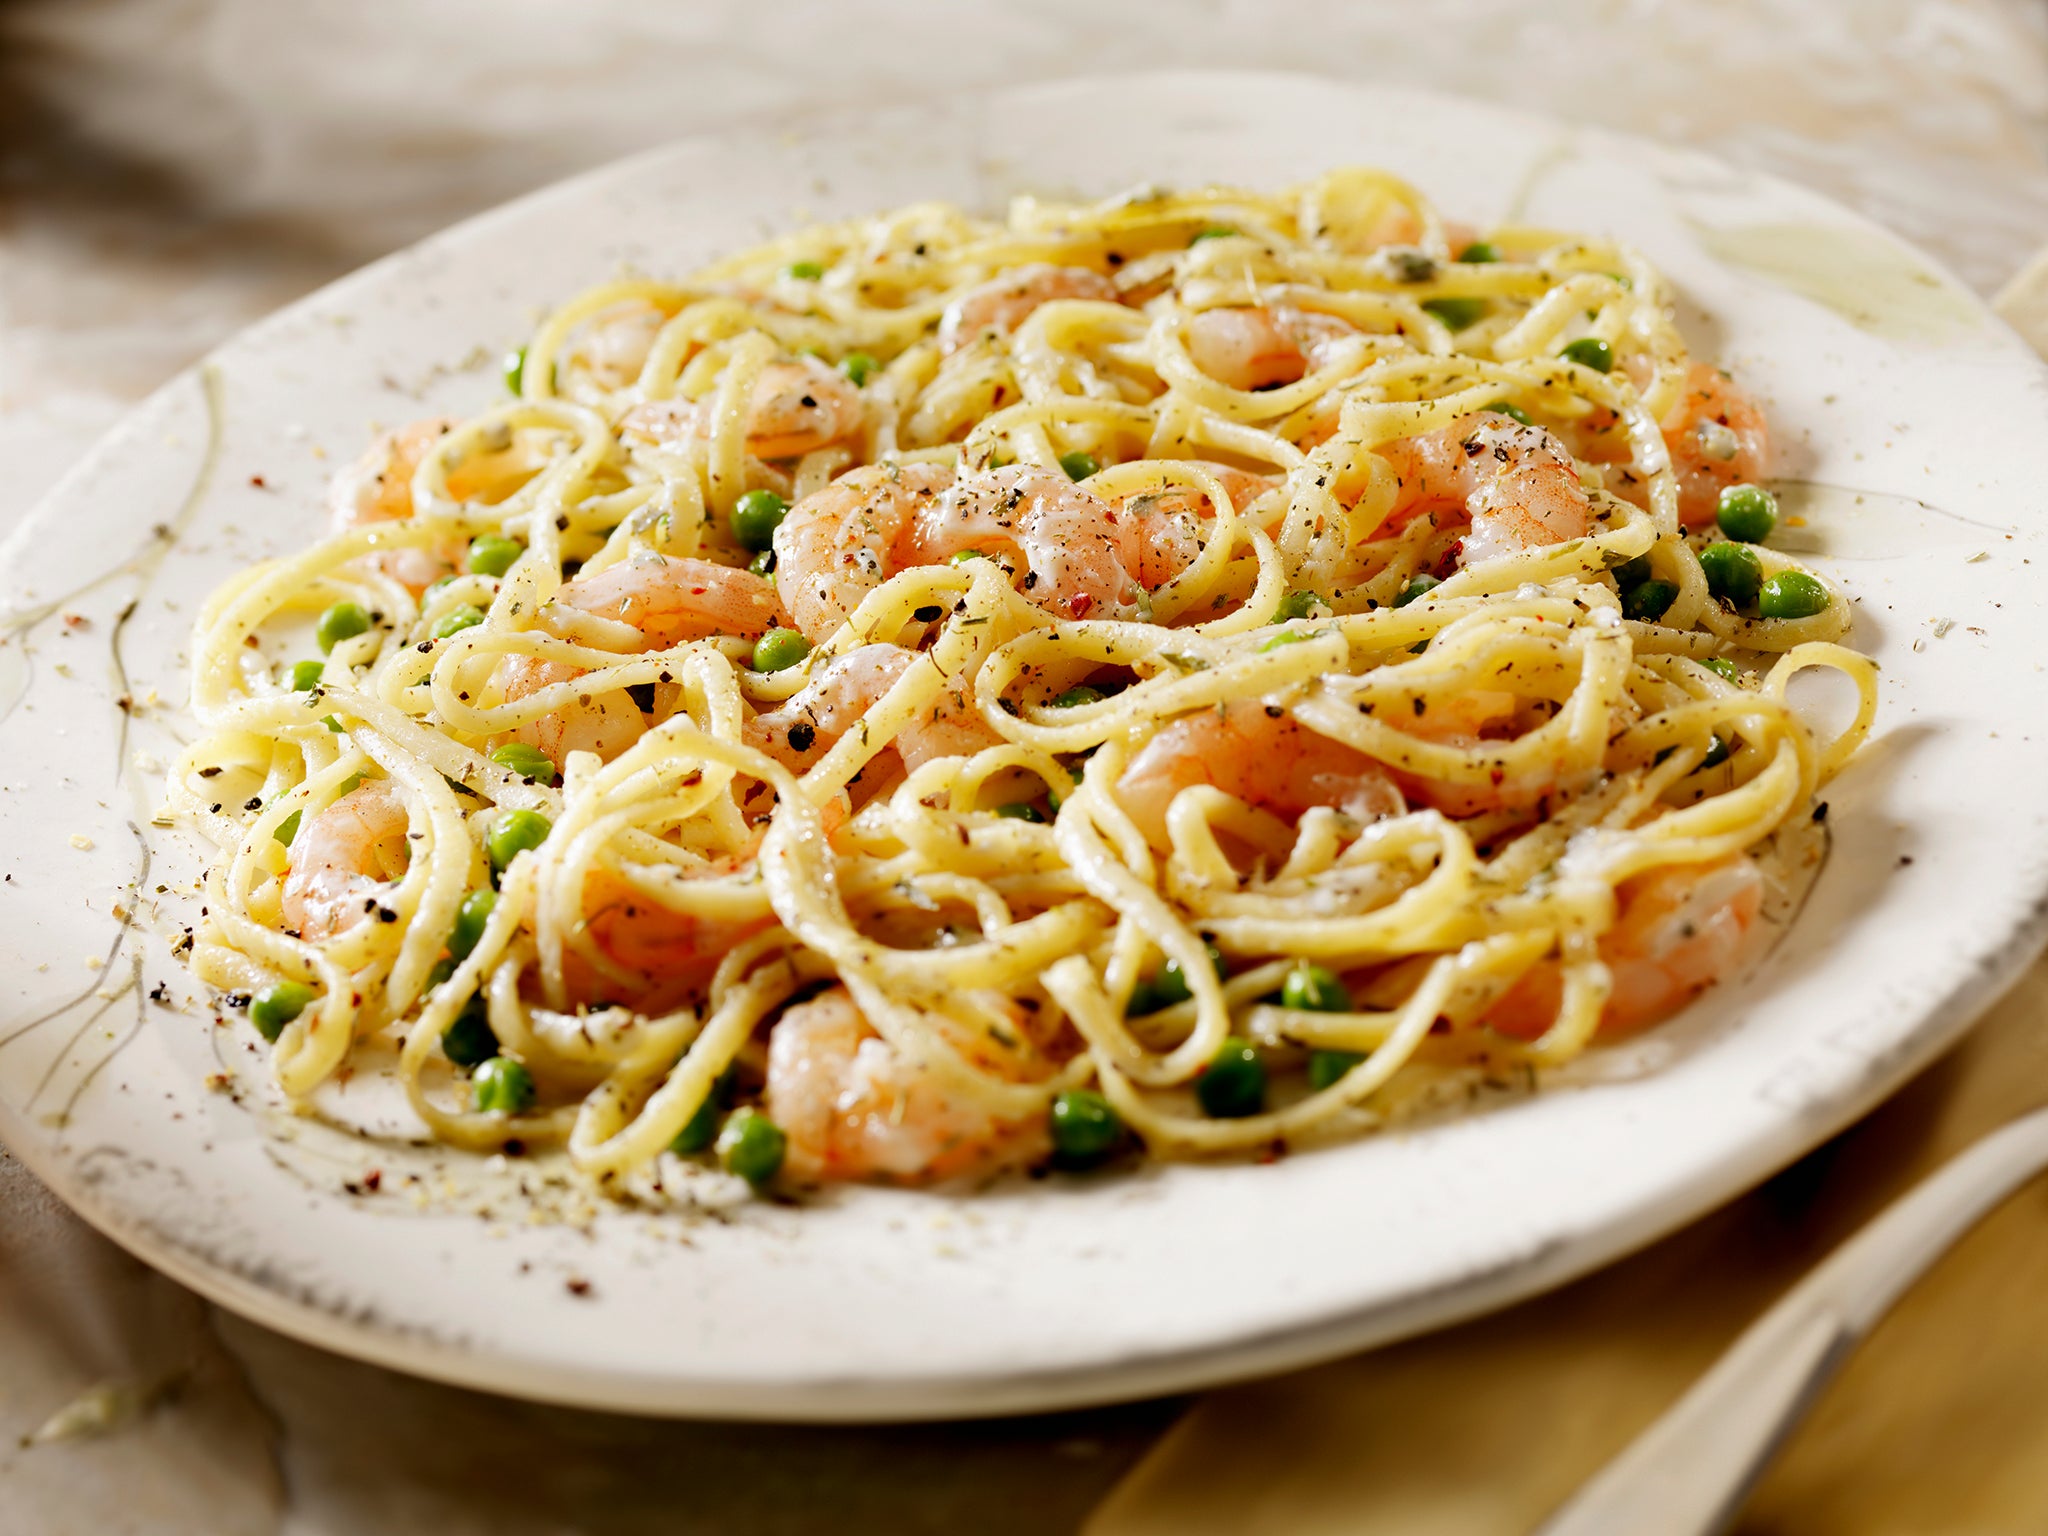 Zesty piccata sauce of fresh lemon juice, briny capers and rich butter is the inspiration behind this weeknight seafood pasta